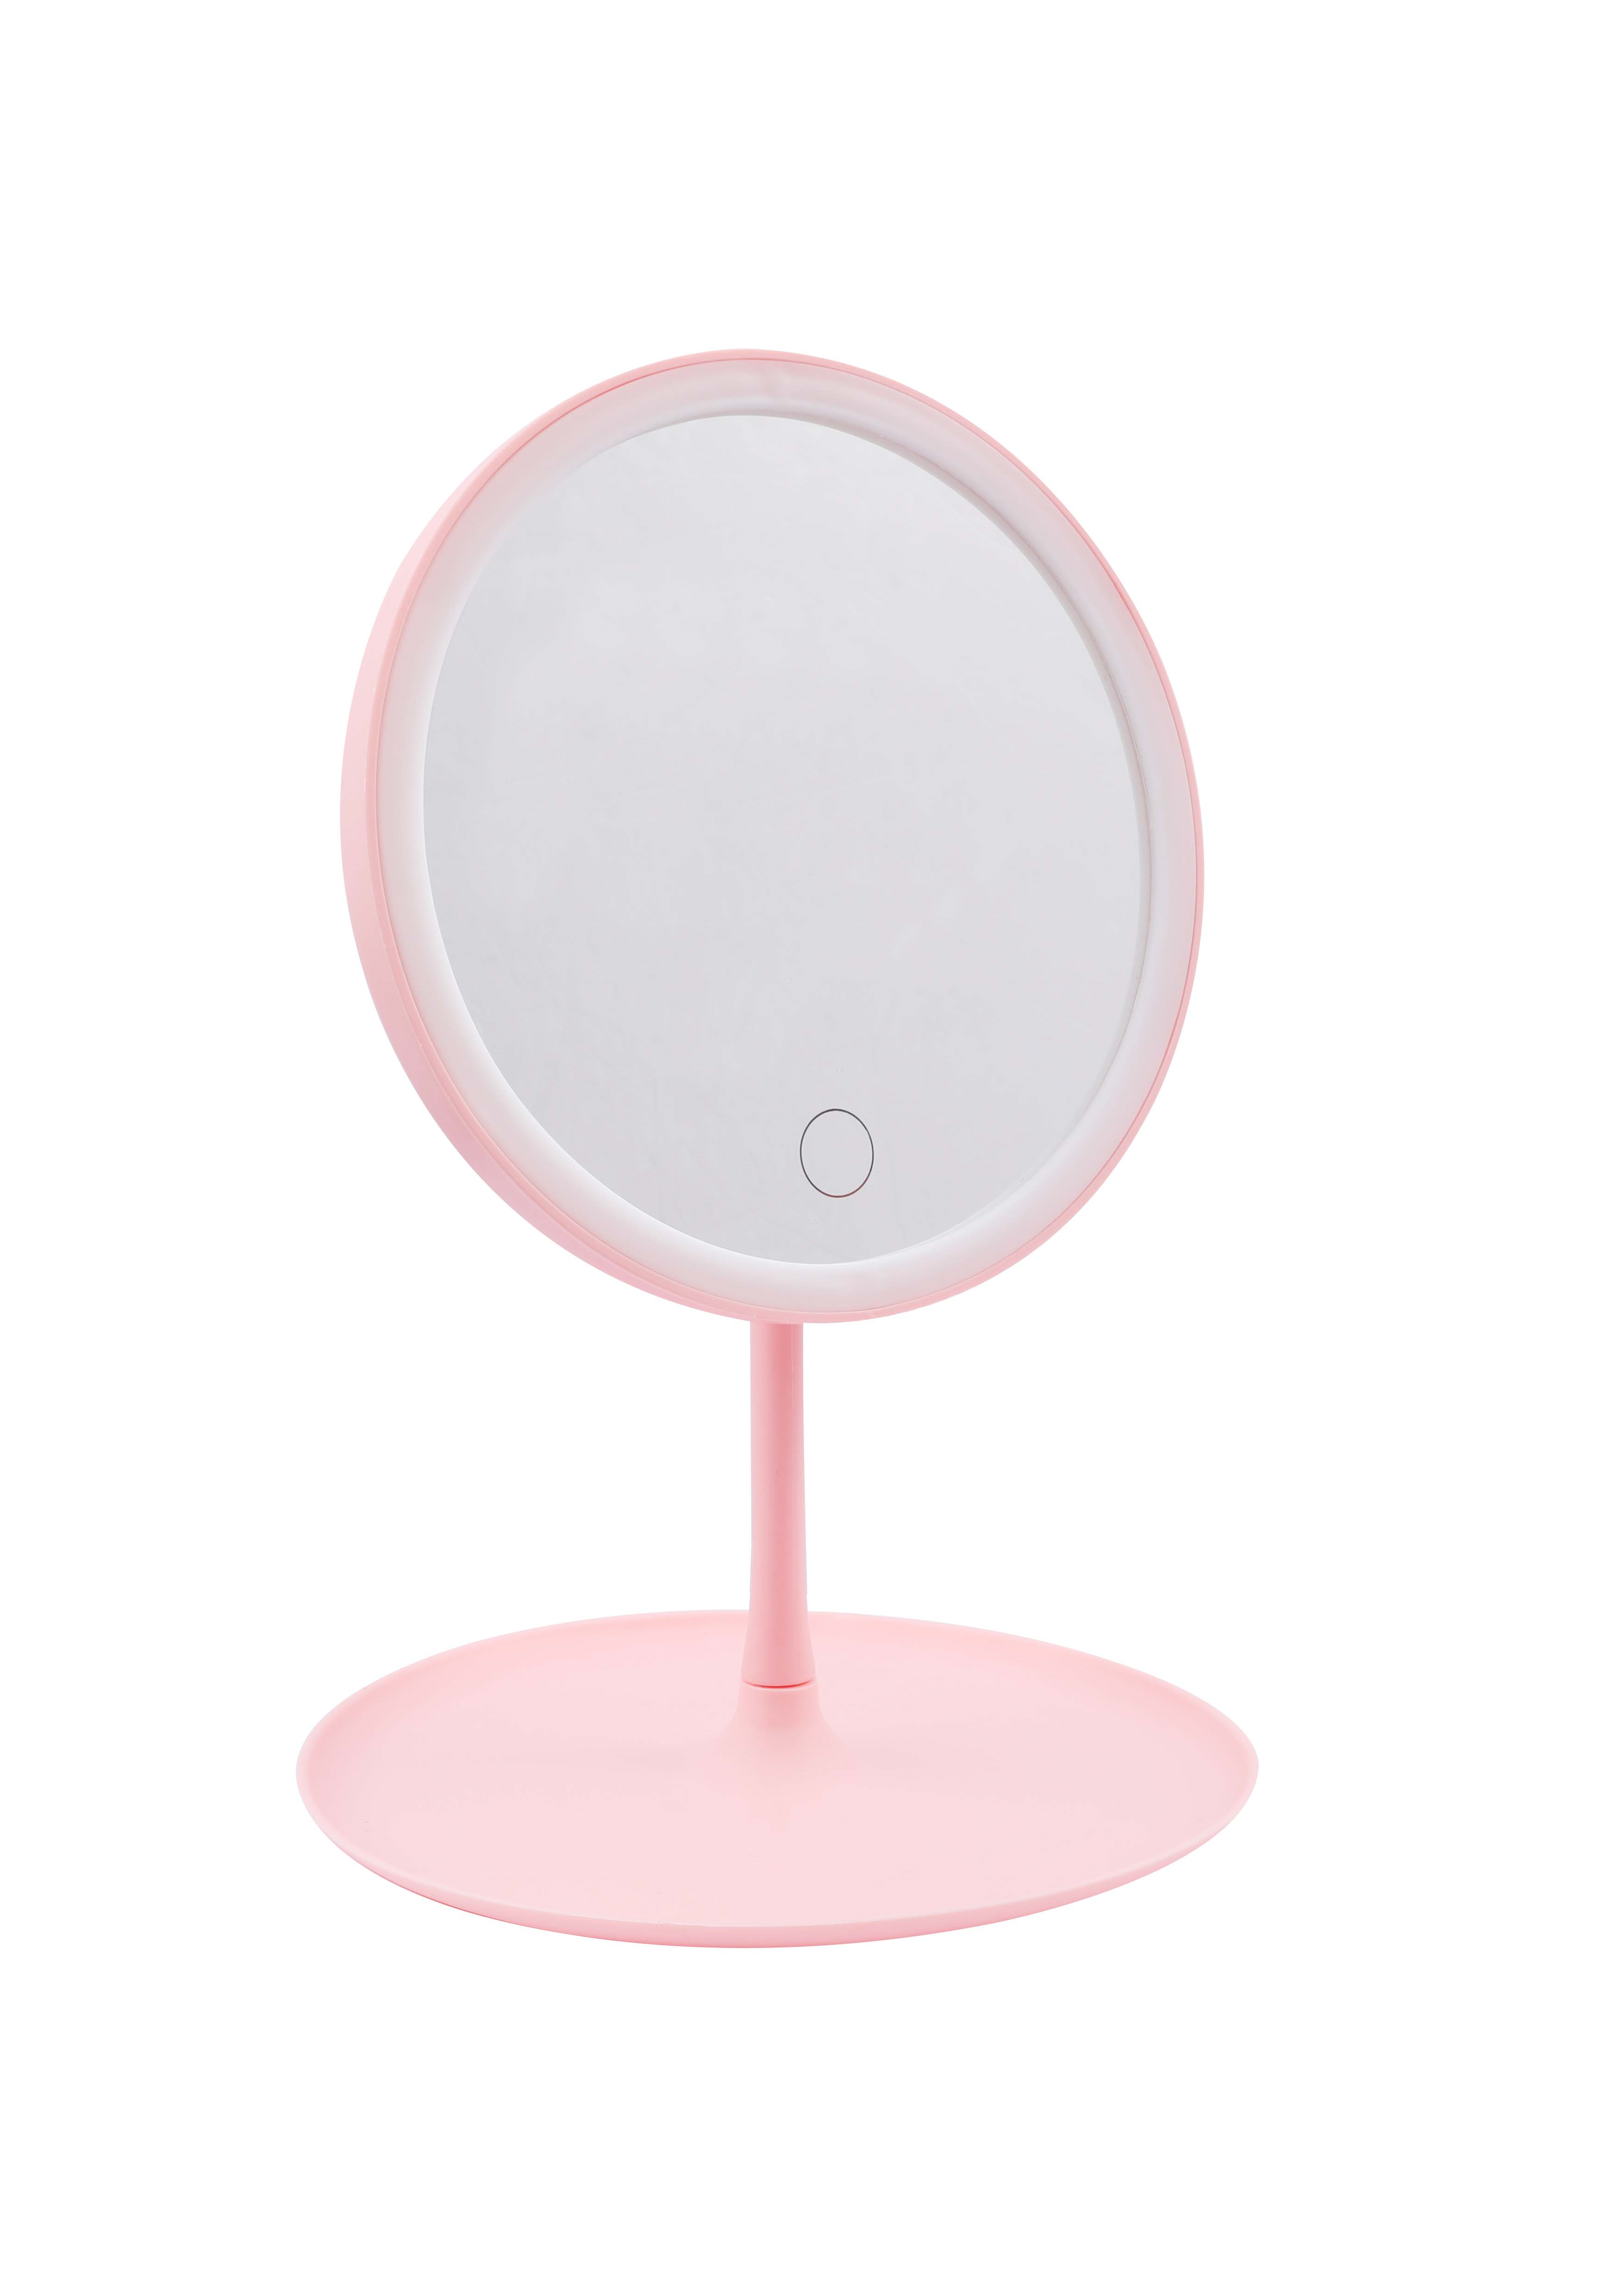 MINISO LED BATTERY POWERED STEPLESS DIMMING ROUND MIRROR (4.5V) 2014597410102 TABLE MIRROR